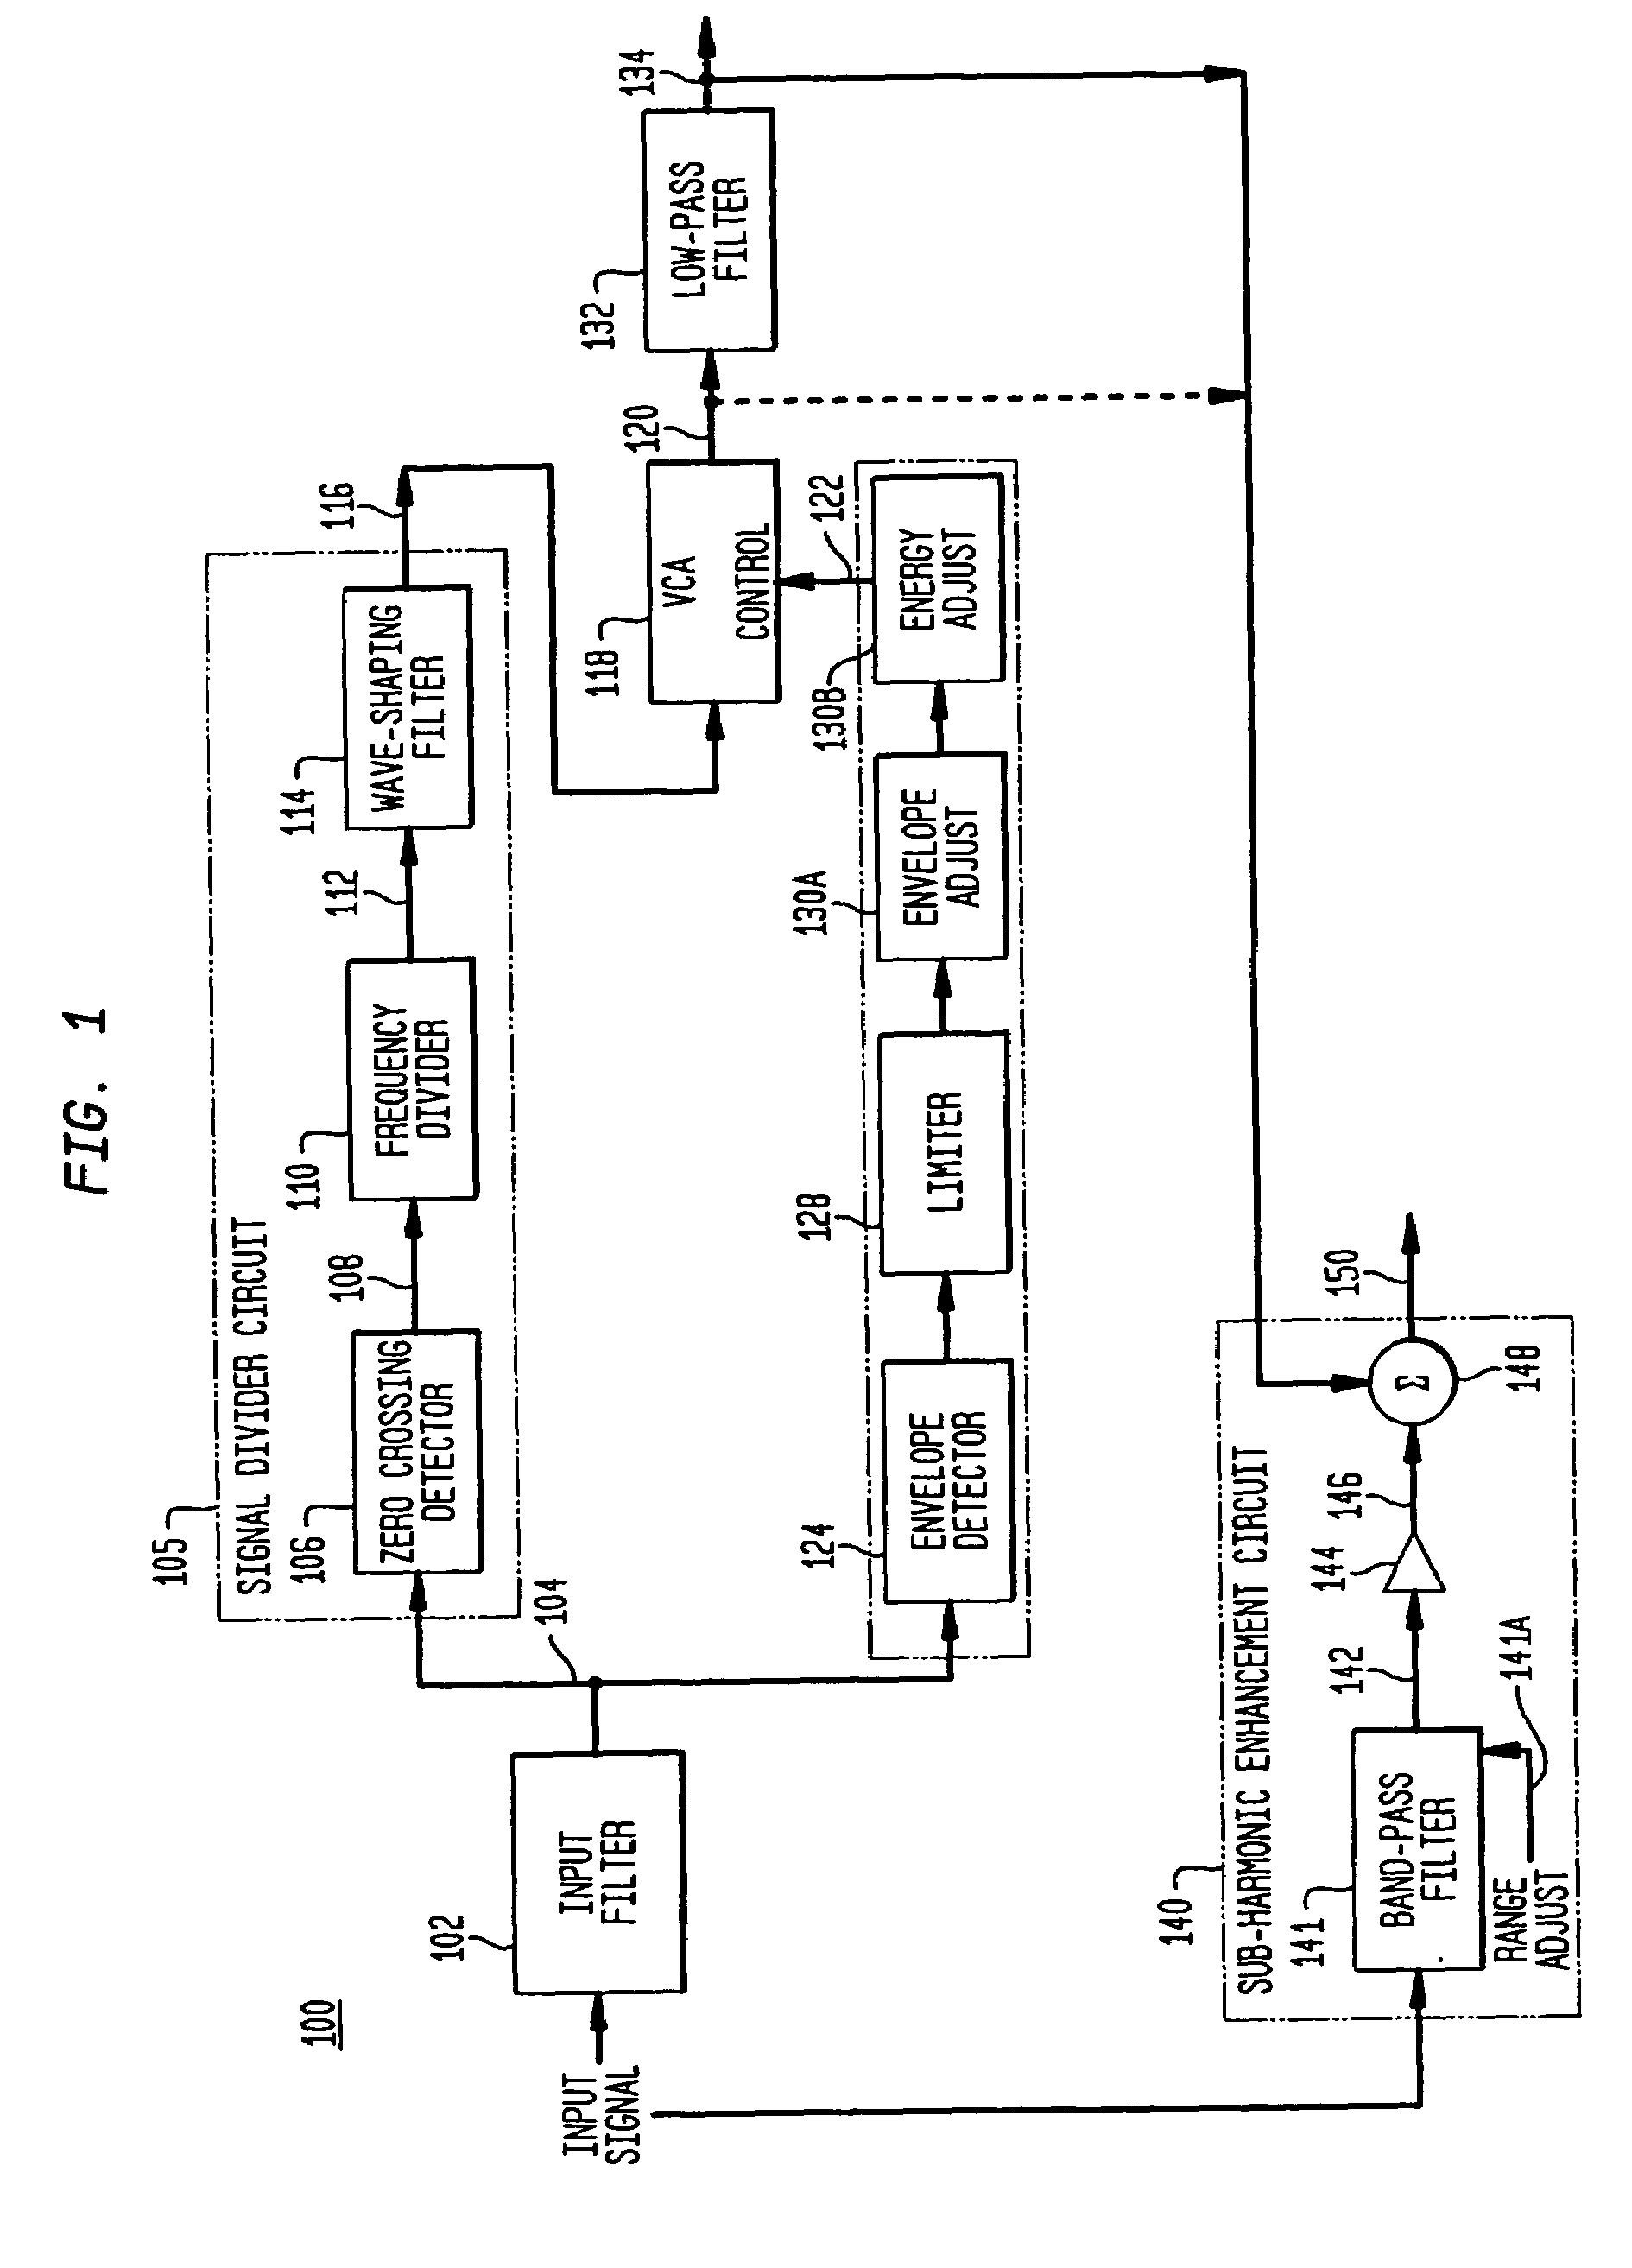 Methods and apparatus for sub-harmonic generation, stereo expansion and distortion